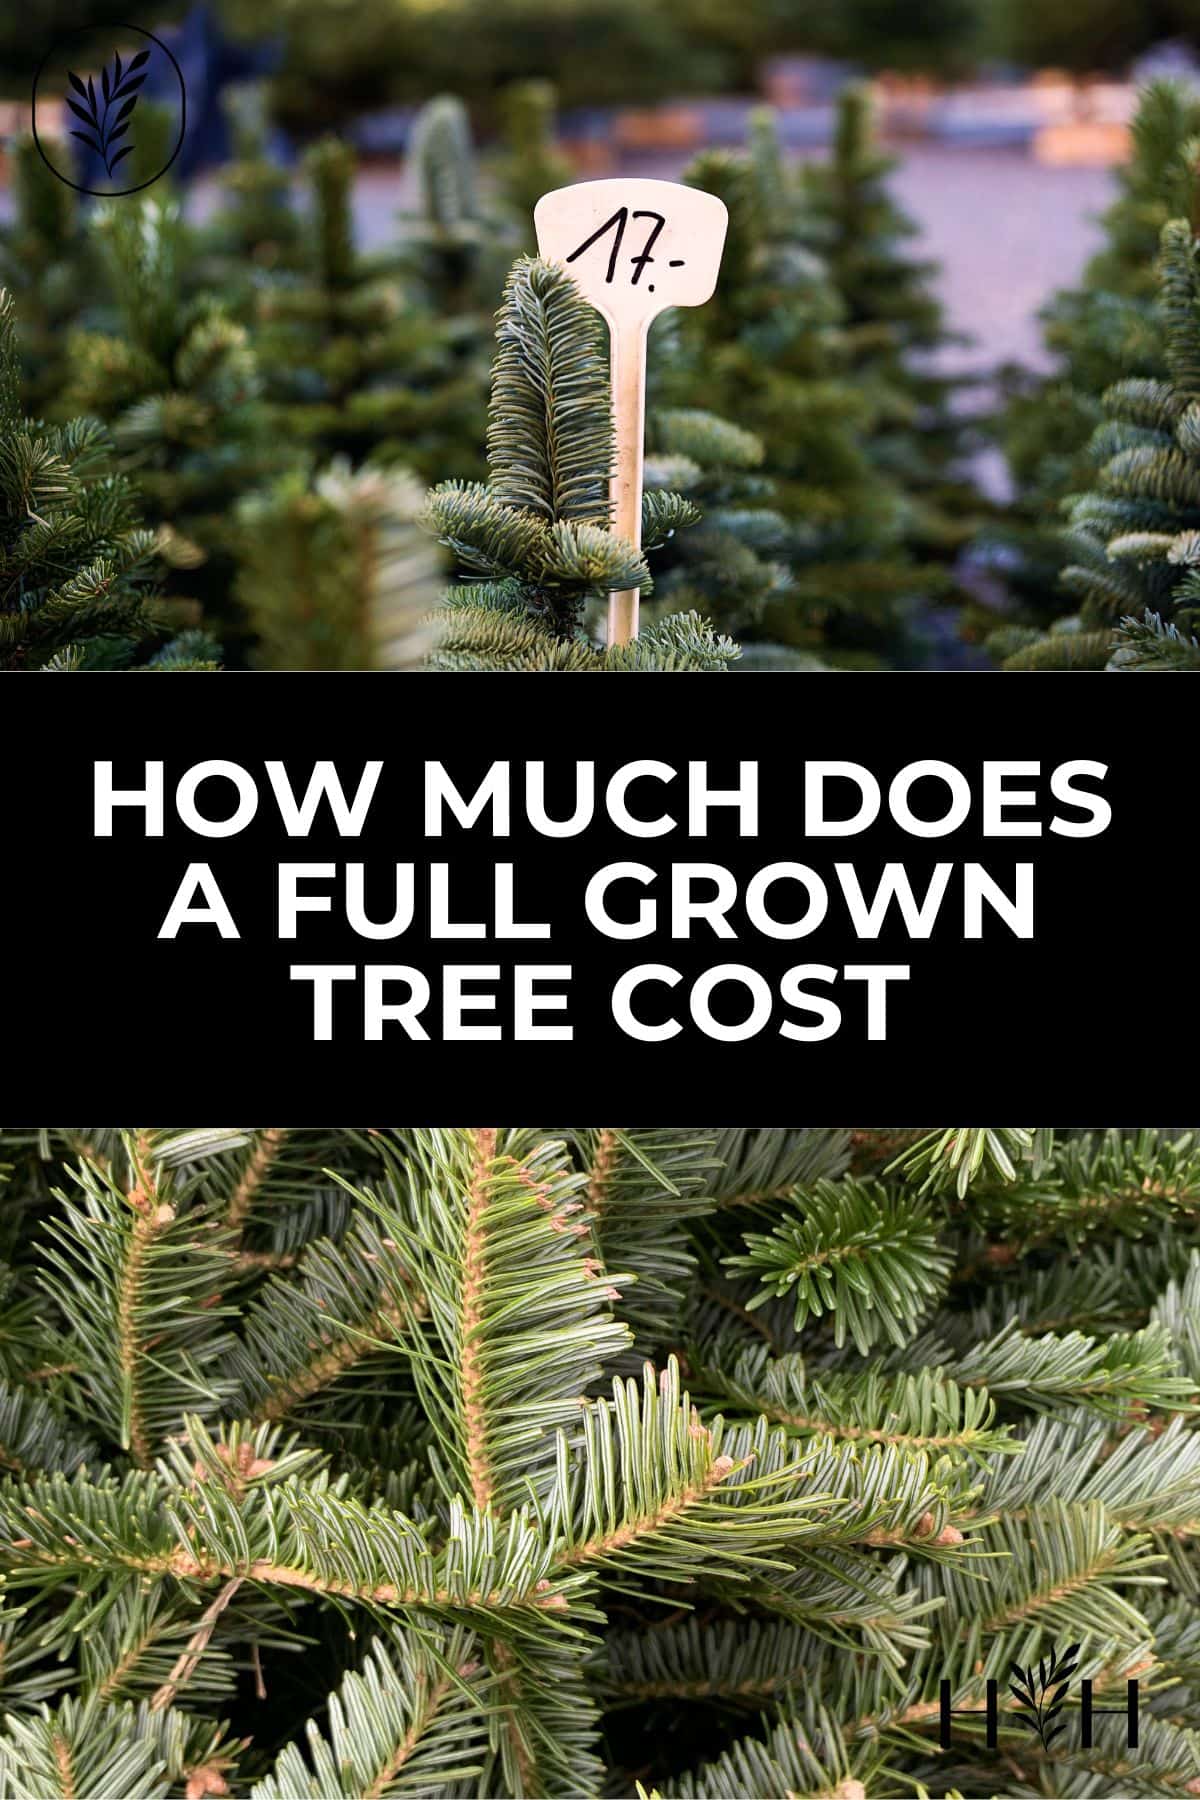 Large trees can add to your curb appeal and can cost a small fortune to purchase and plant! Here are some example prices for buying mature trees and tips for how to save some cash when adding large, full-grown trees to your landscape. Via @home4theharvest